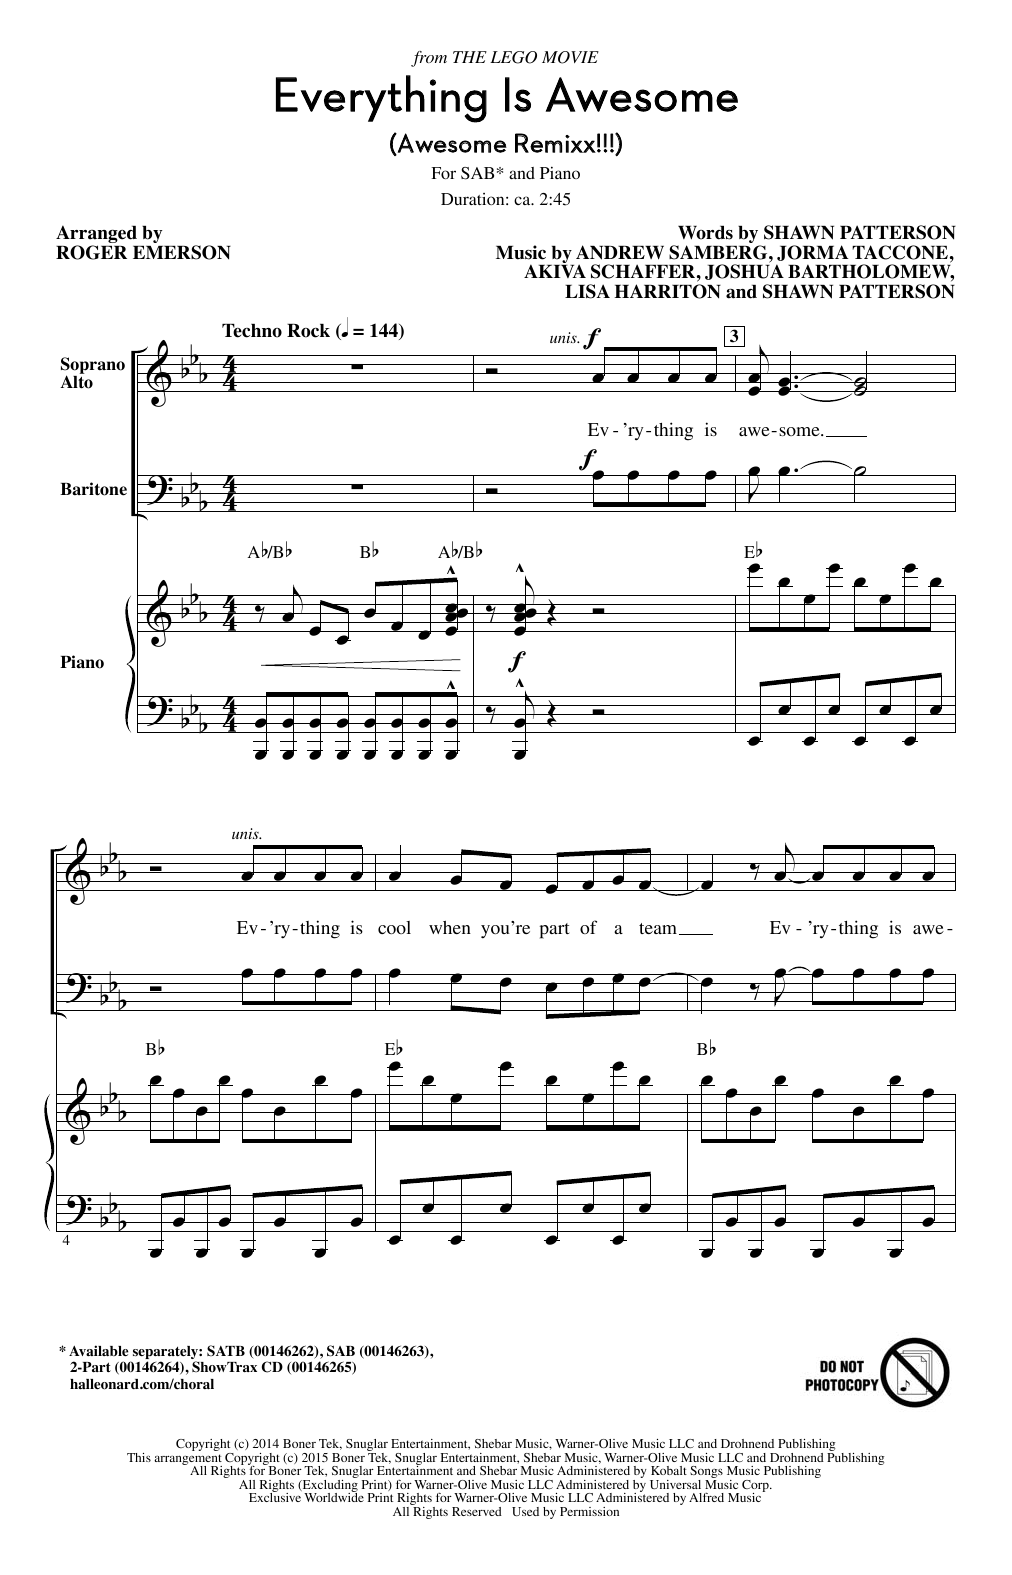 Download Tegan and Sara Everything Is Awesome (Awesome Remixx!! Sheet Music